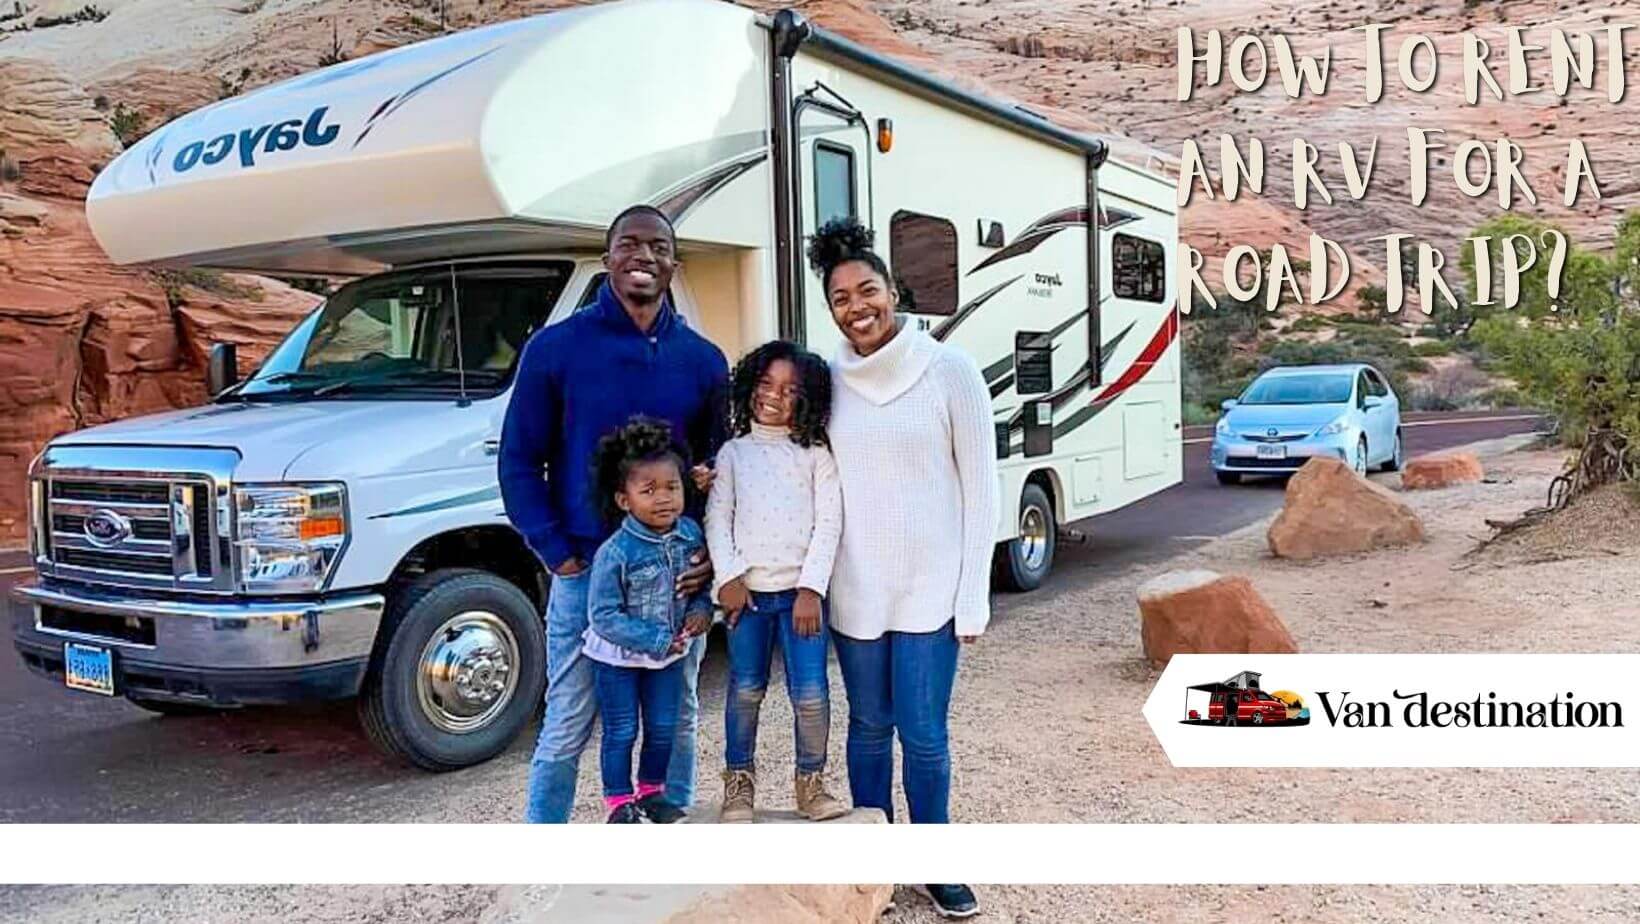 How To Rent An RV For a Road Trip